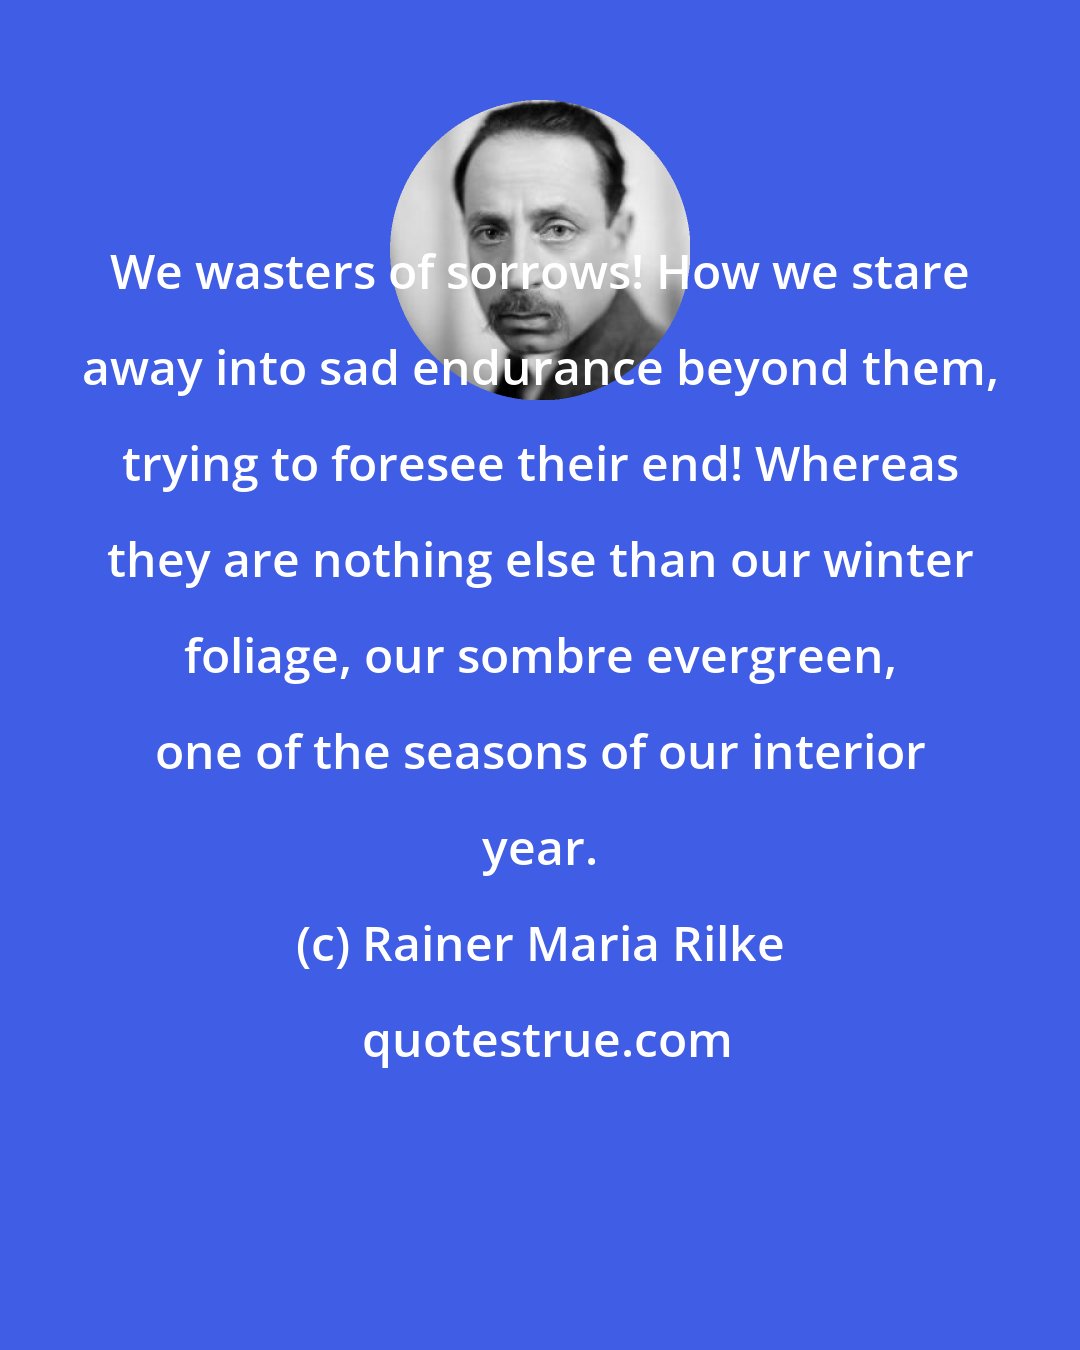 Rainer Maria Rilke: We wasters of sorrows! How we stare away into sad endurance beyond them, trying to foresee their end! Whereas they are nothing else than our winter foliage, our sombre evergreen, one of the seasons of our interior year.